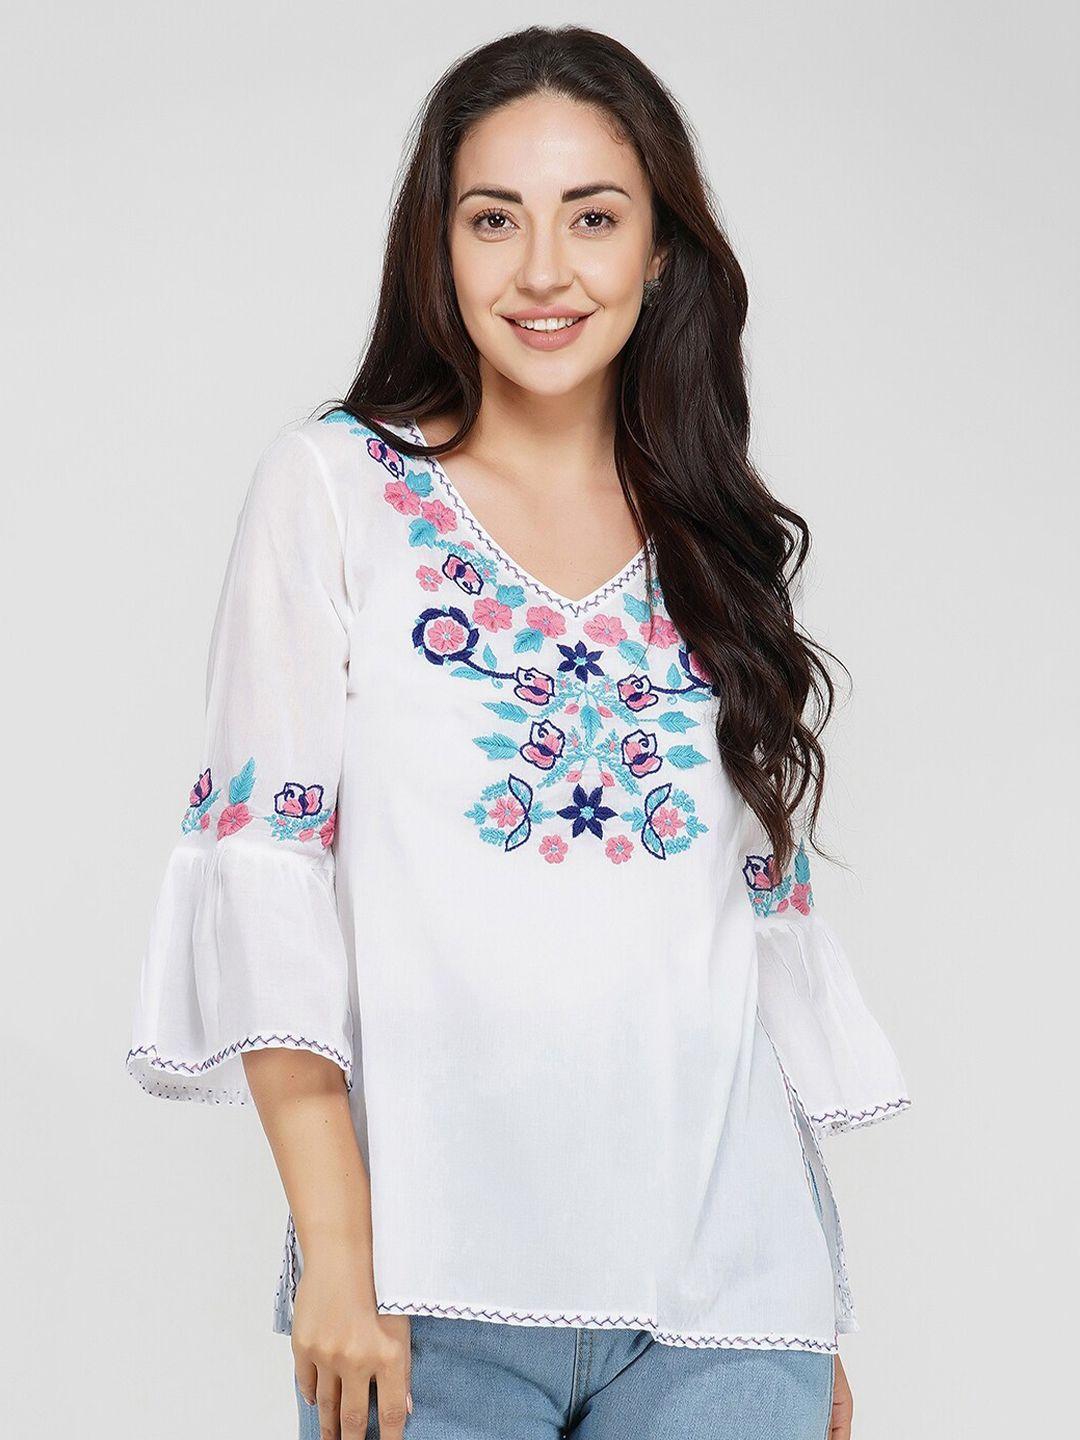 vahson-white-&-blue-floral-embroidered-top